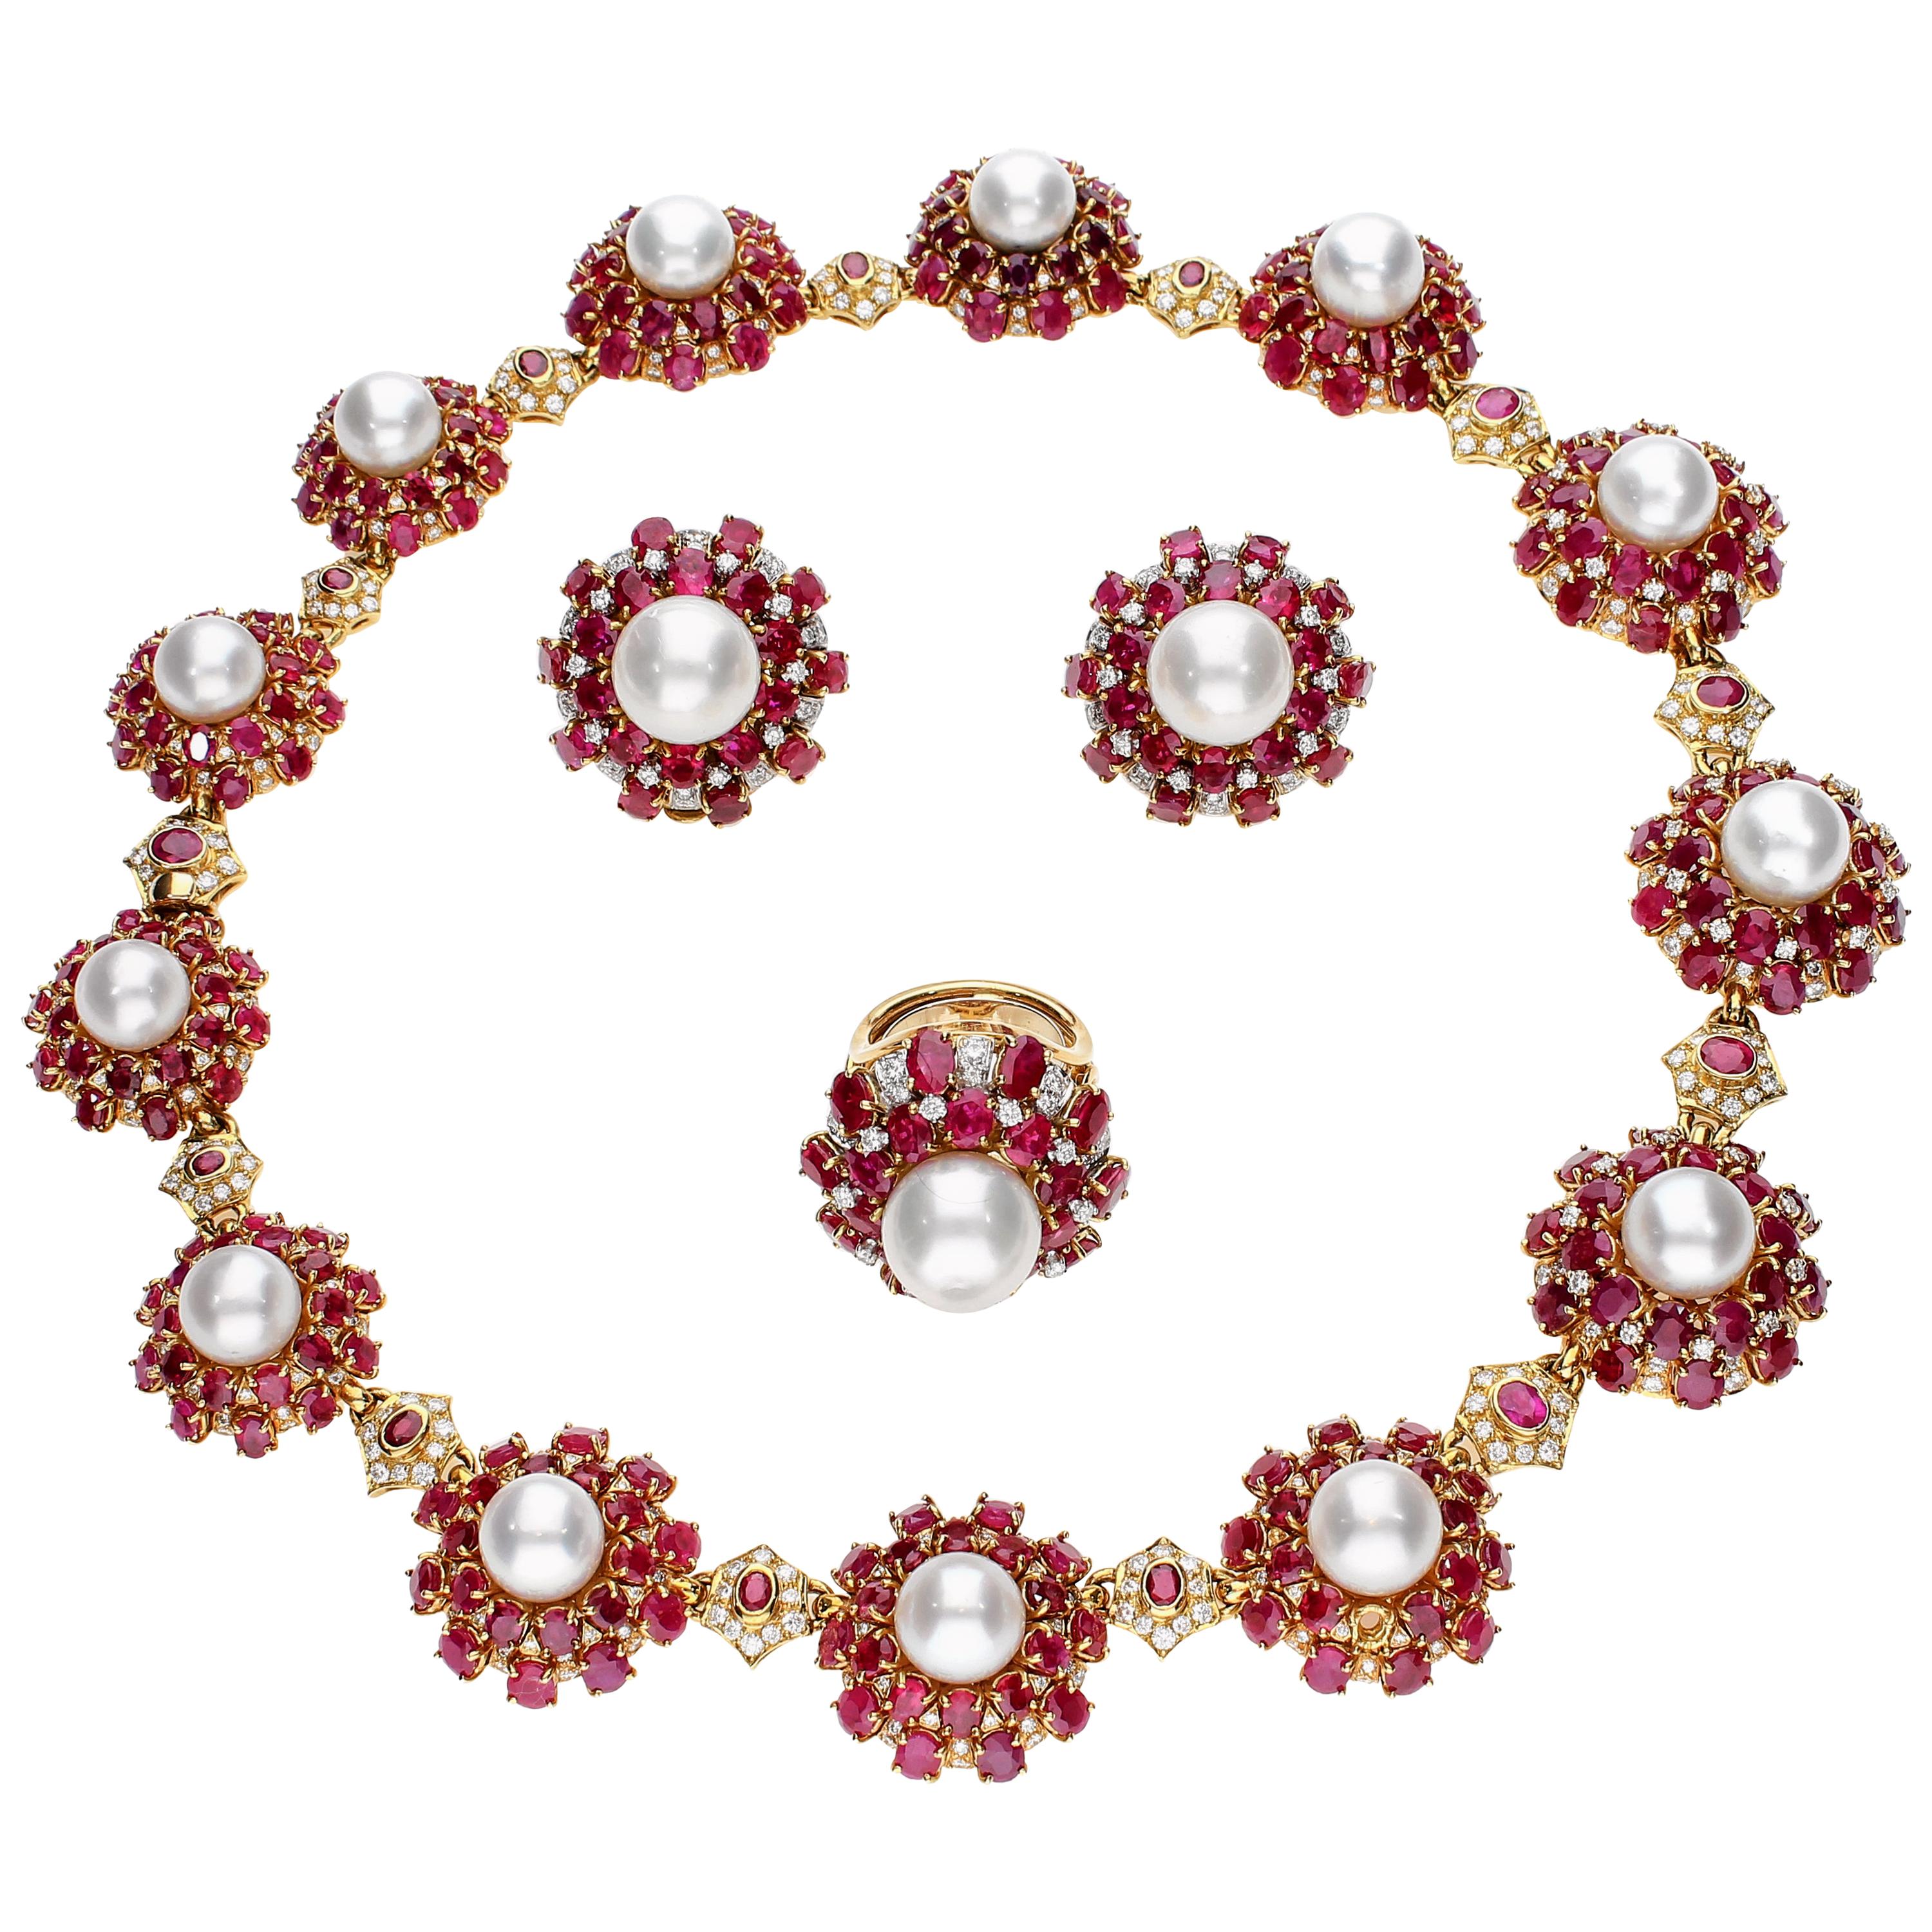 Parure with Rubies, Pearls and Diamonds in 18 Karat Yellow Gold